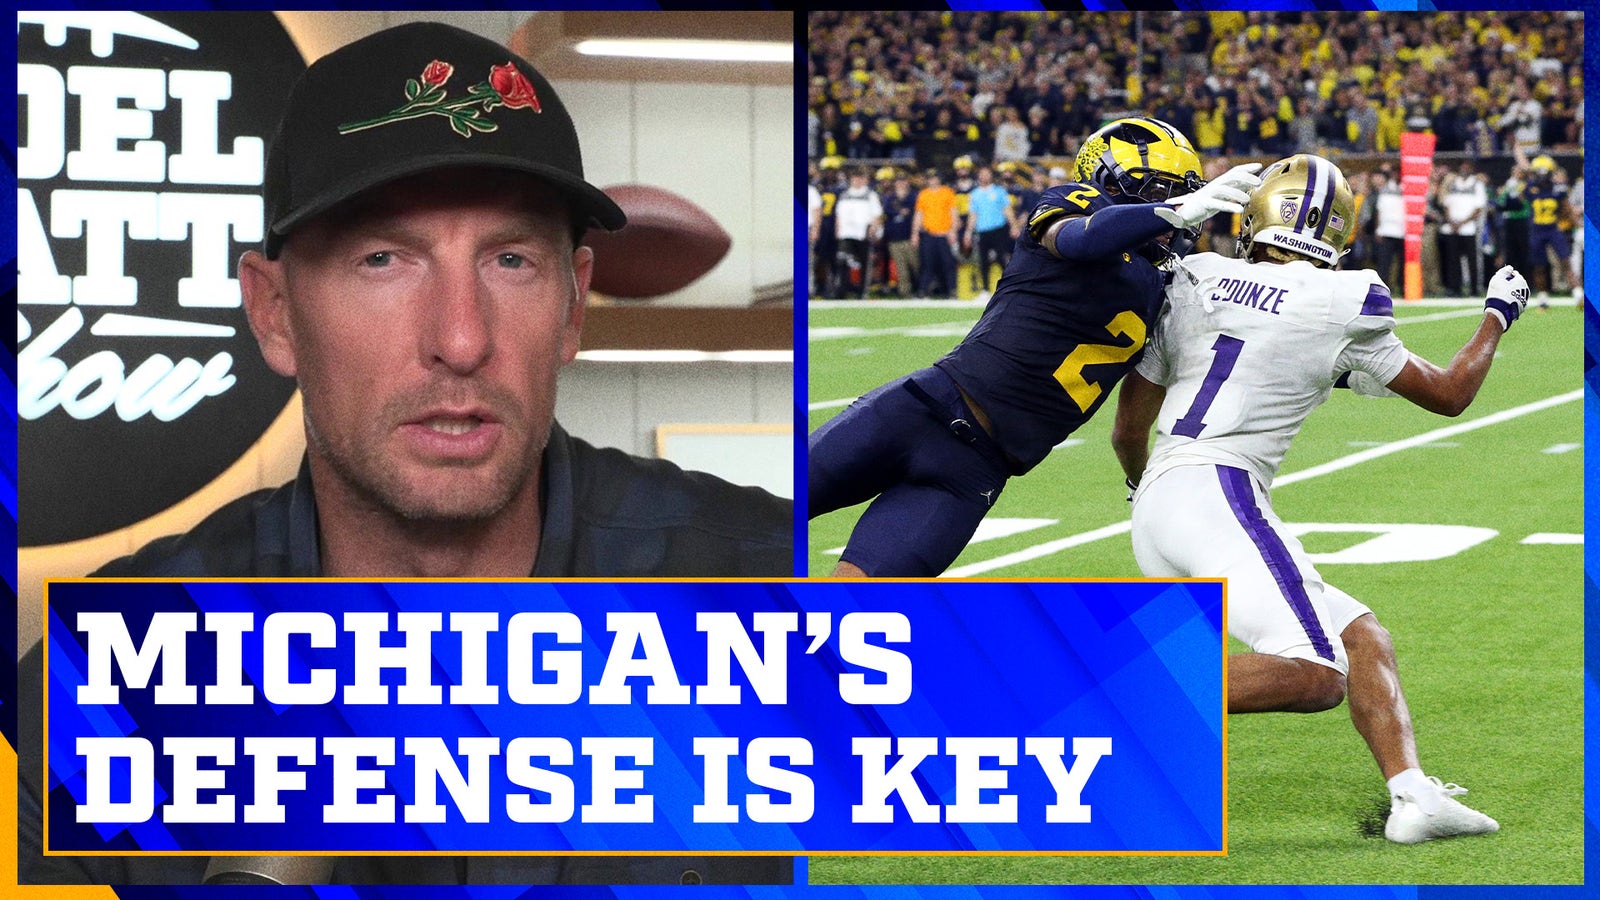 Beryl TV zeoft7t2zj8hrnwd For Michael Penix Jr. and Washington, everything was clicking until painful Michigan matchup Sports 